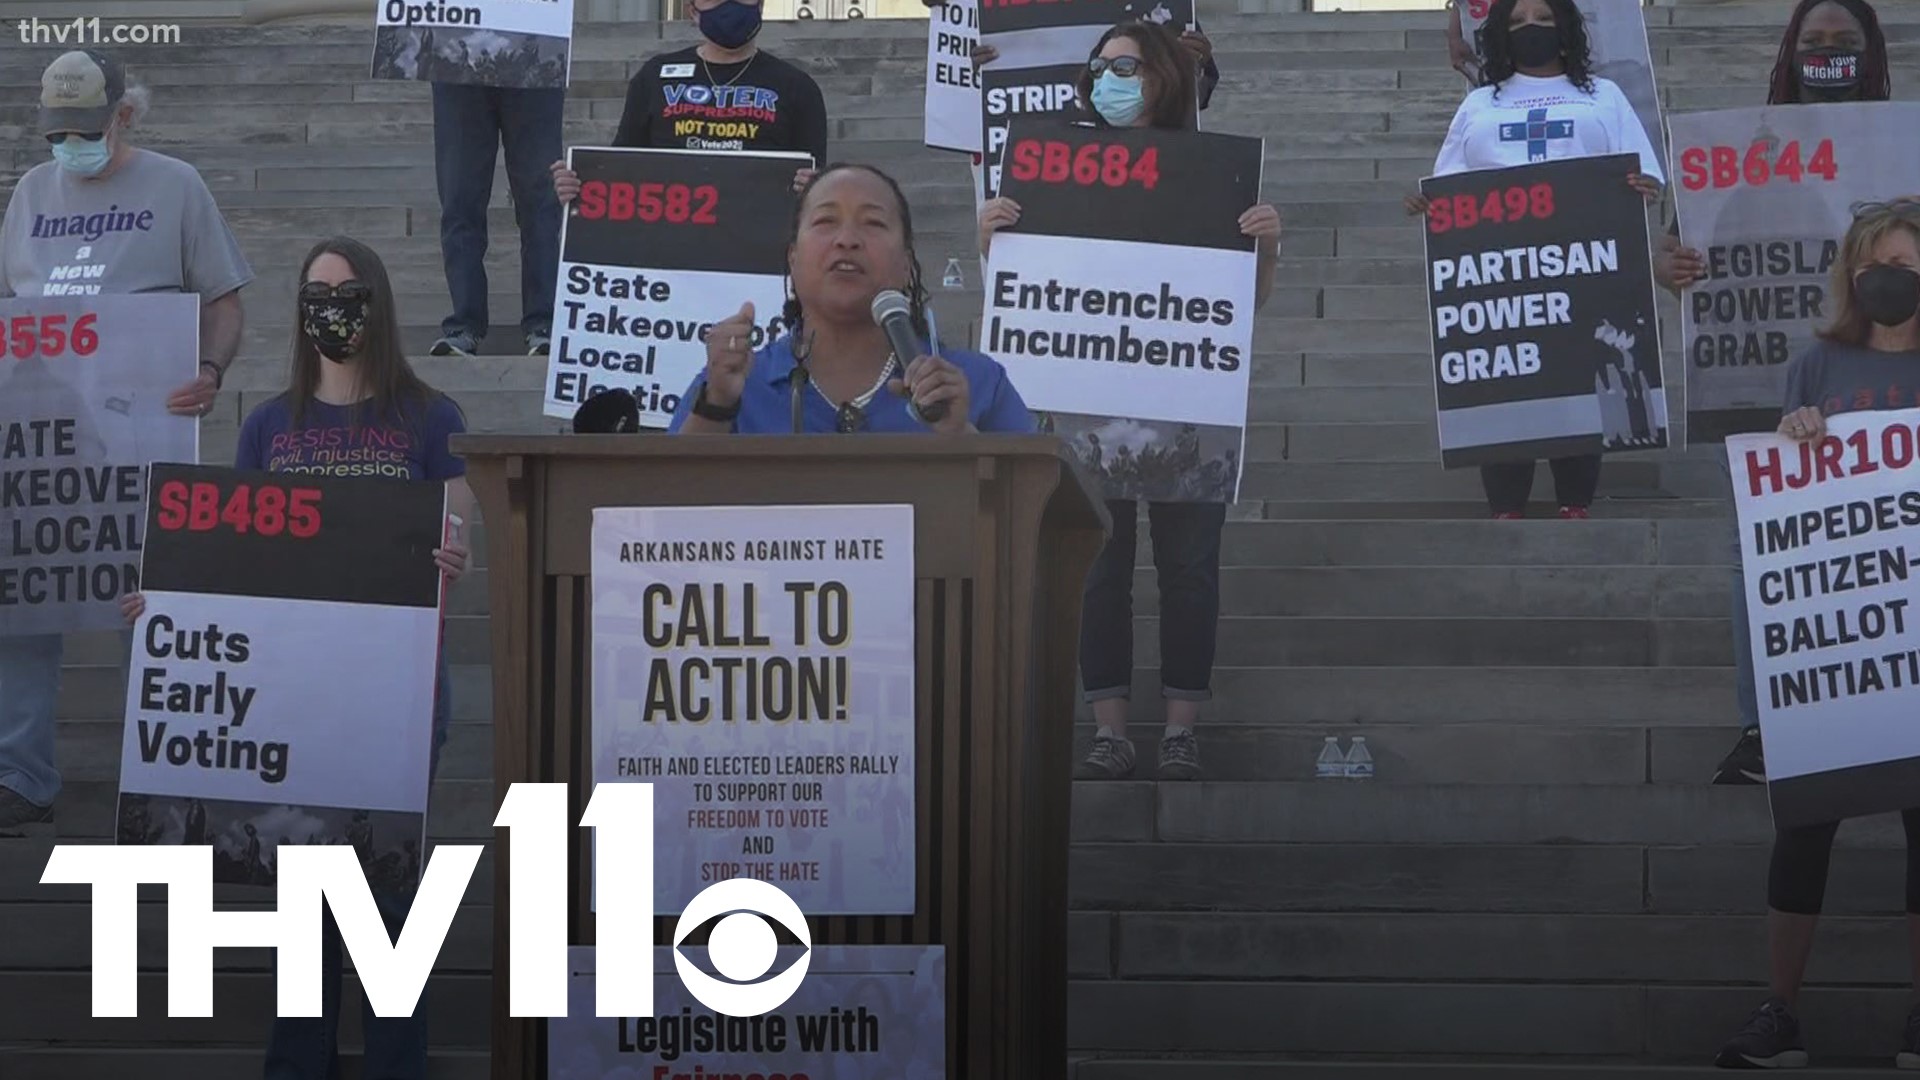 Demonstrators gathered on the steps of the Arkansas State Capitol on Sunday to protest the bill.